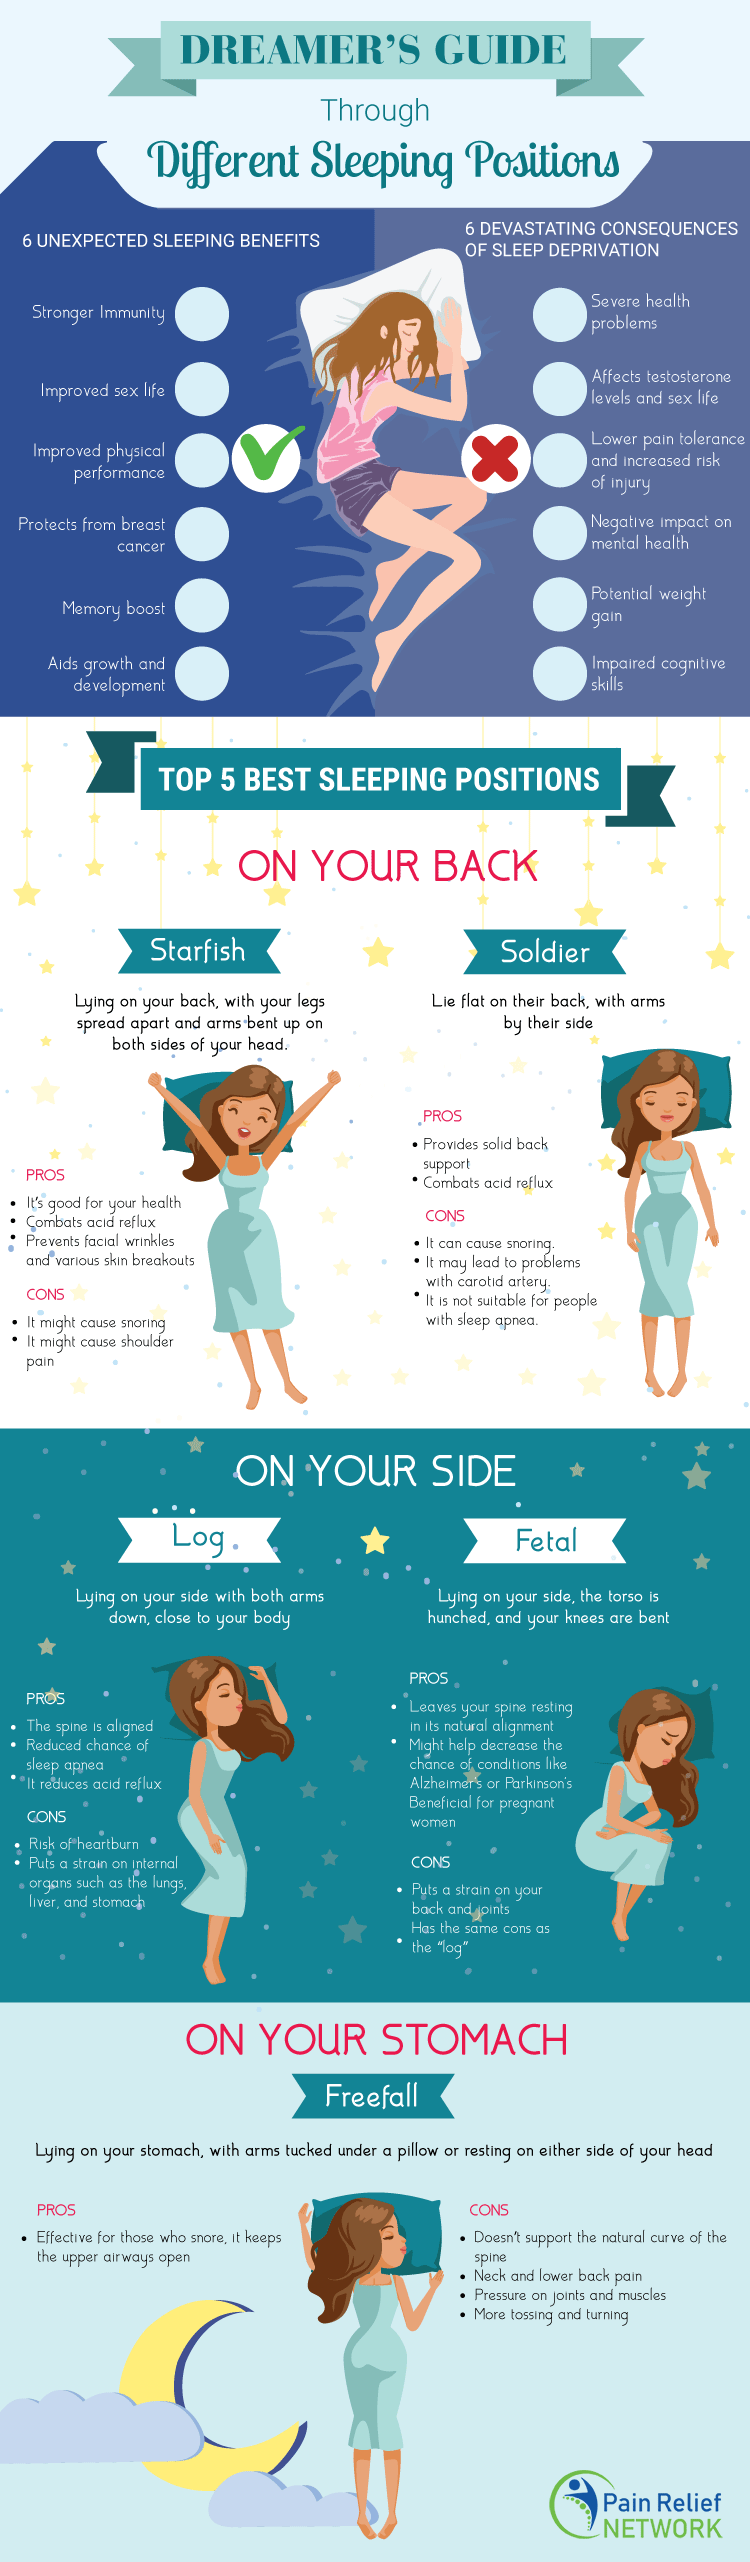 Dreamer’s Guide through Different Sleeping Positions